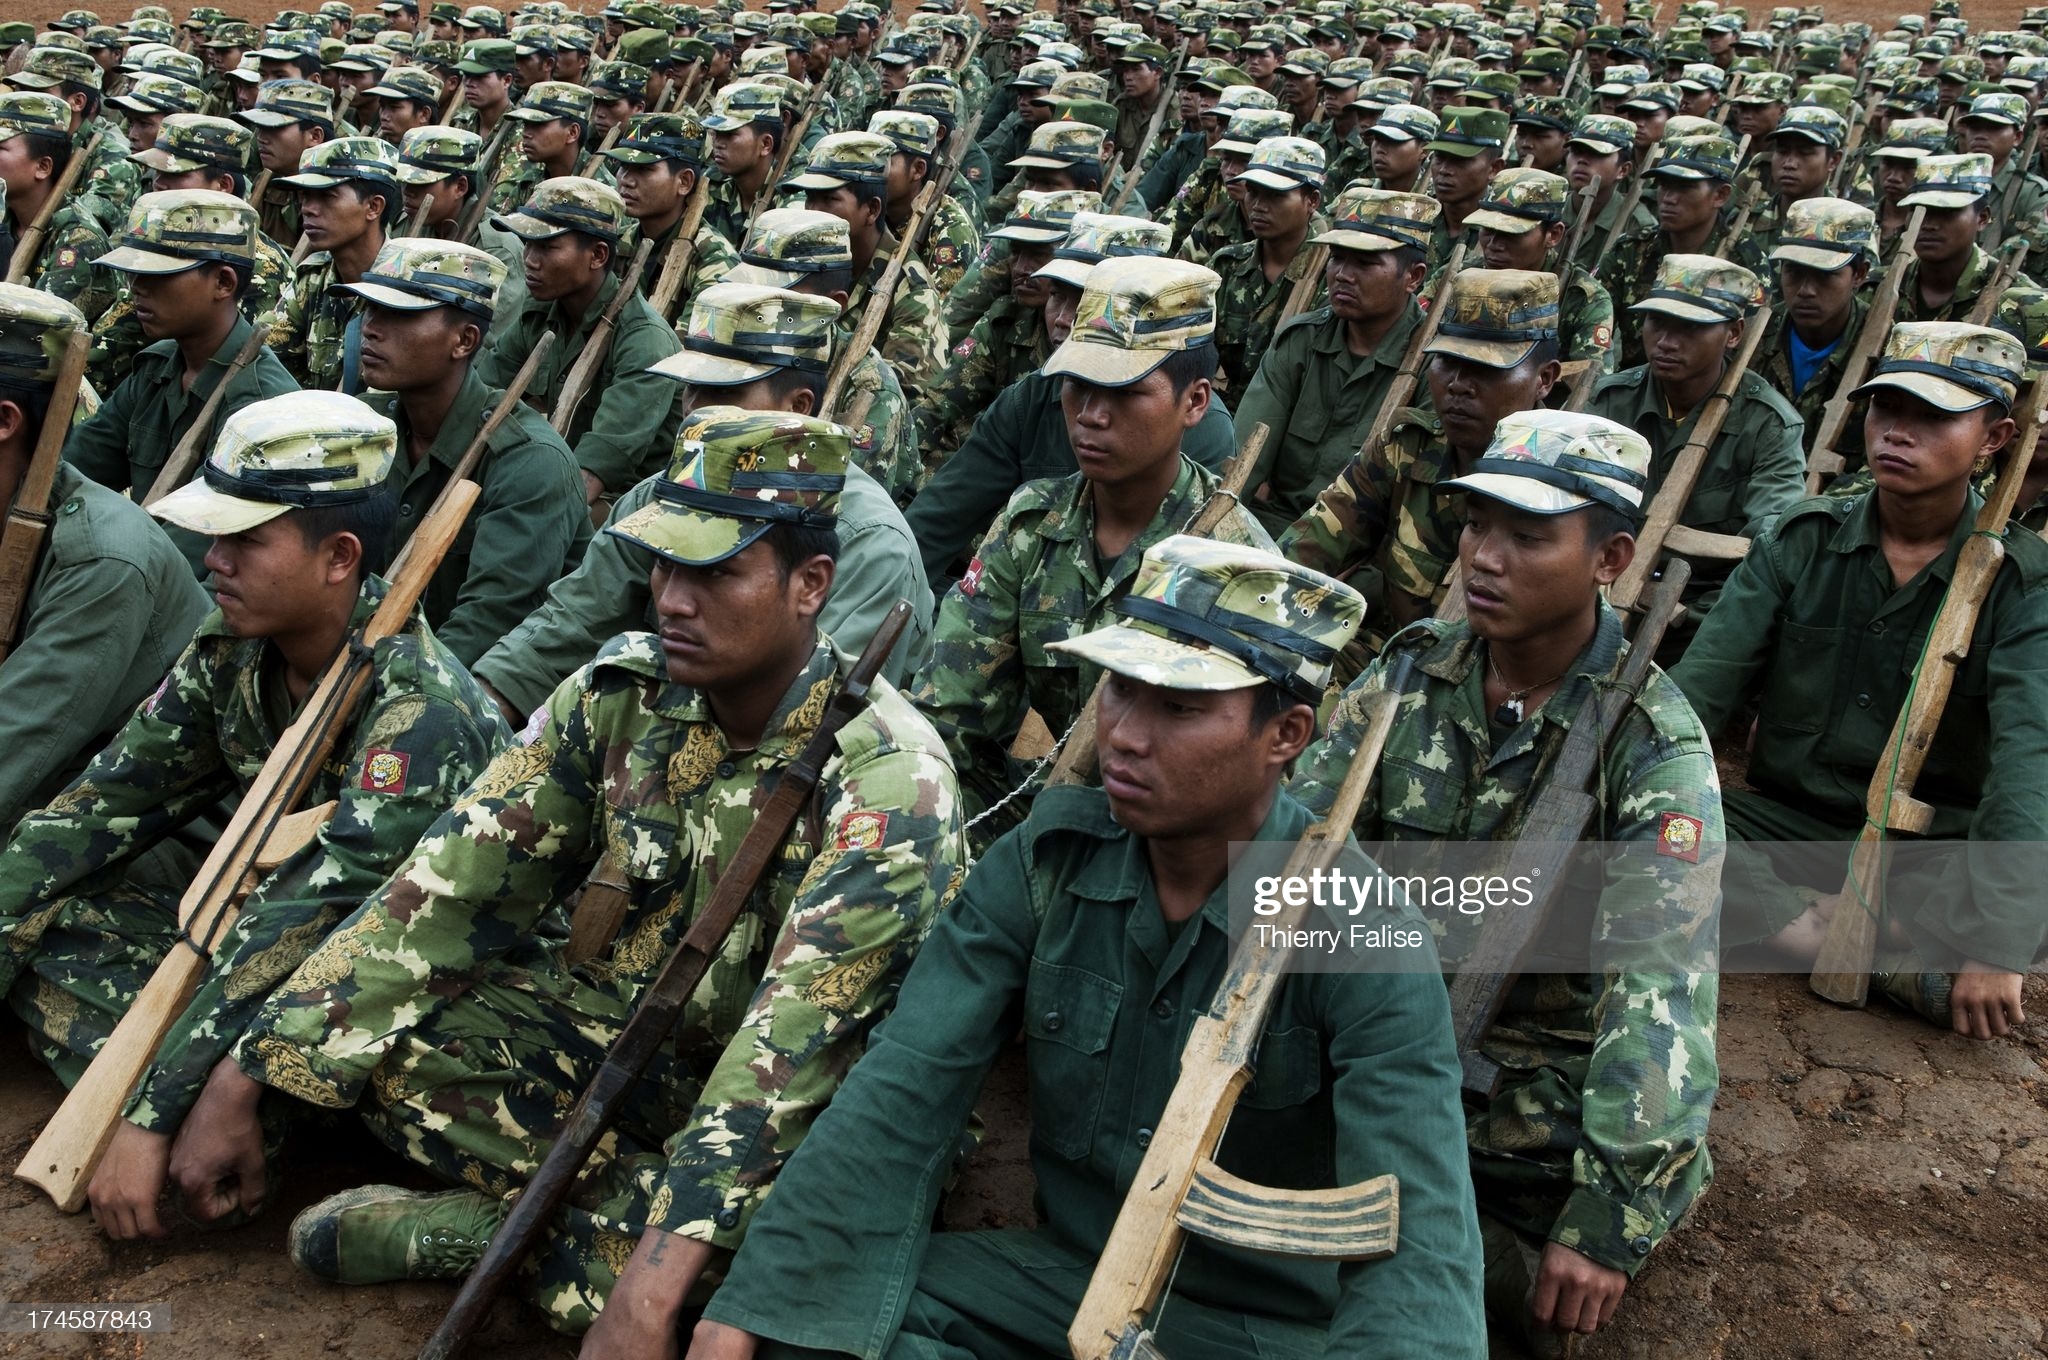 officers-from-the-shan-state-army-south-during-a-training-session-an-picture-id174587843s=2048x2048.jpg